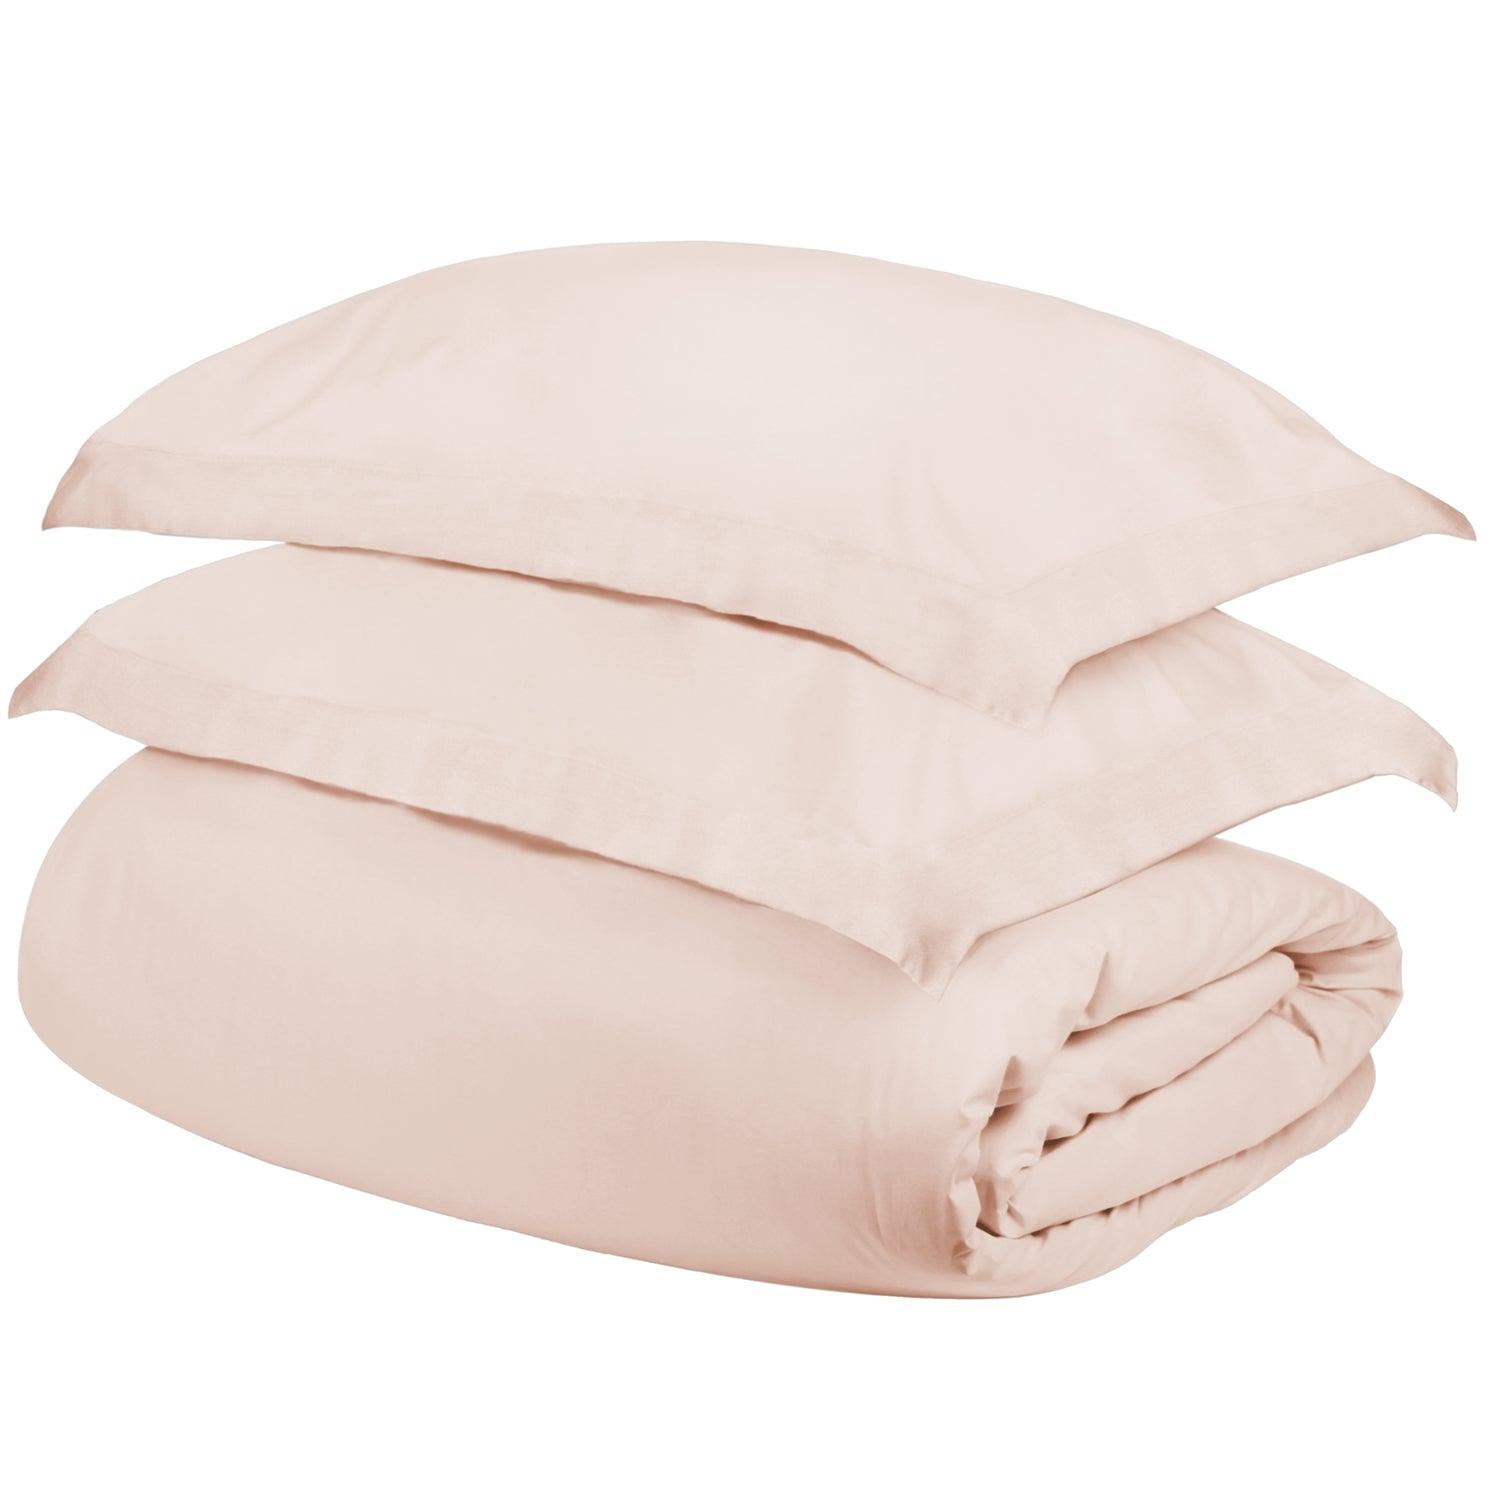  Superior Egyptian Cotton 400 Thread Count Solid Duvet Cover Set - Pink